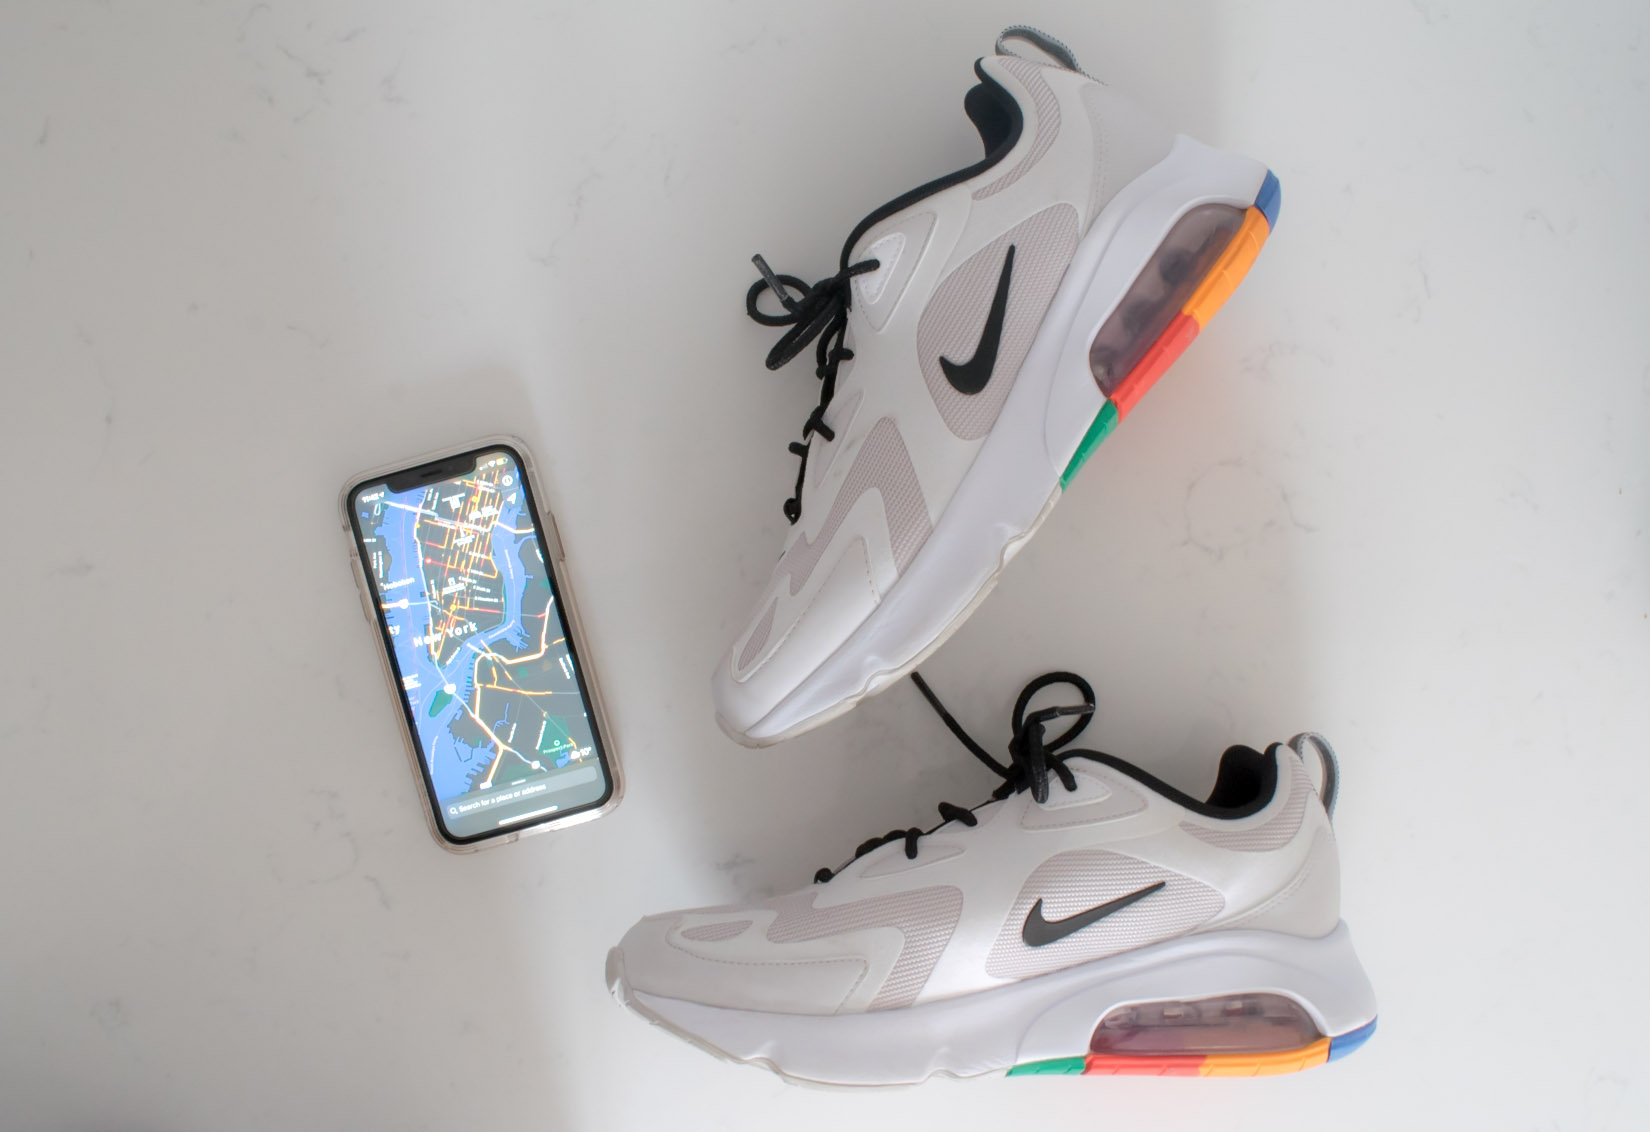 An overhead view of a pair of Nike sneakers set aside an iphone displaying a map on its screen